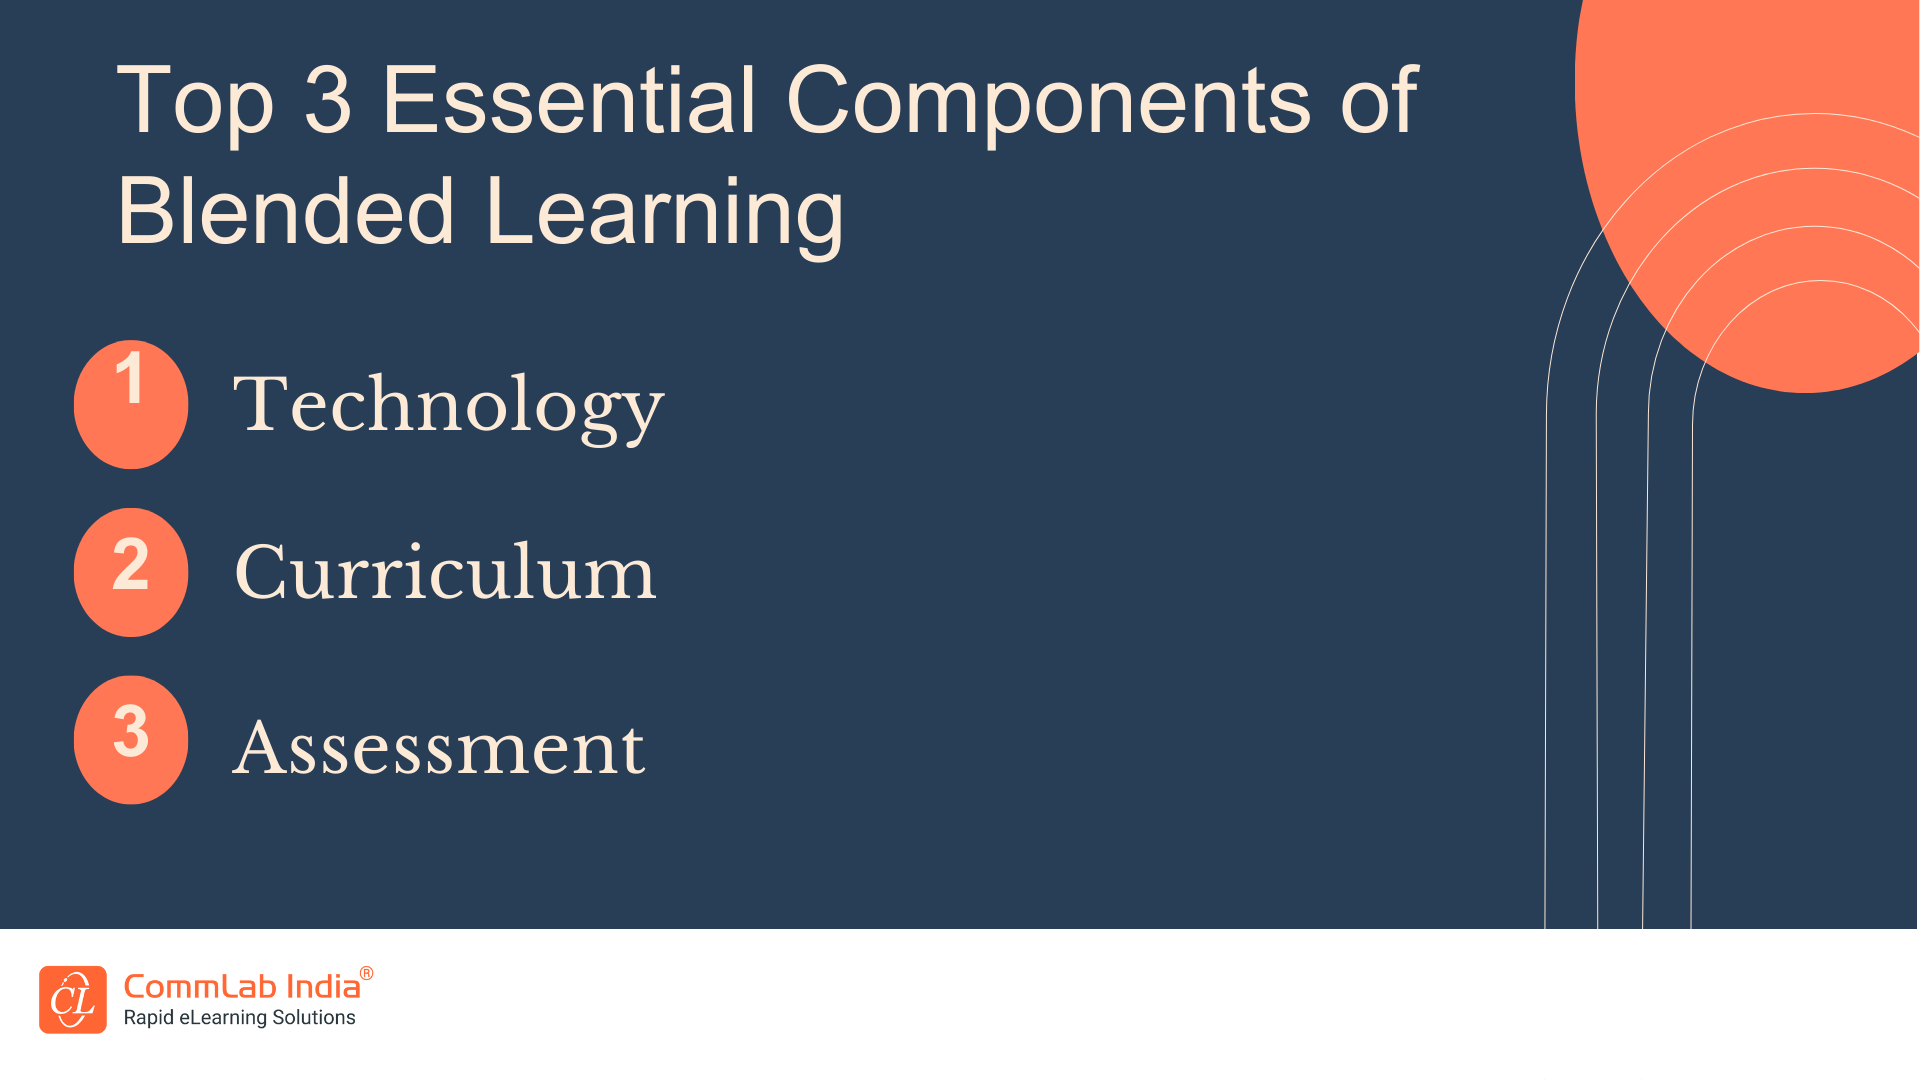 Top 3 Essential Components of Blended Learning